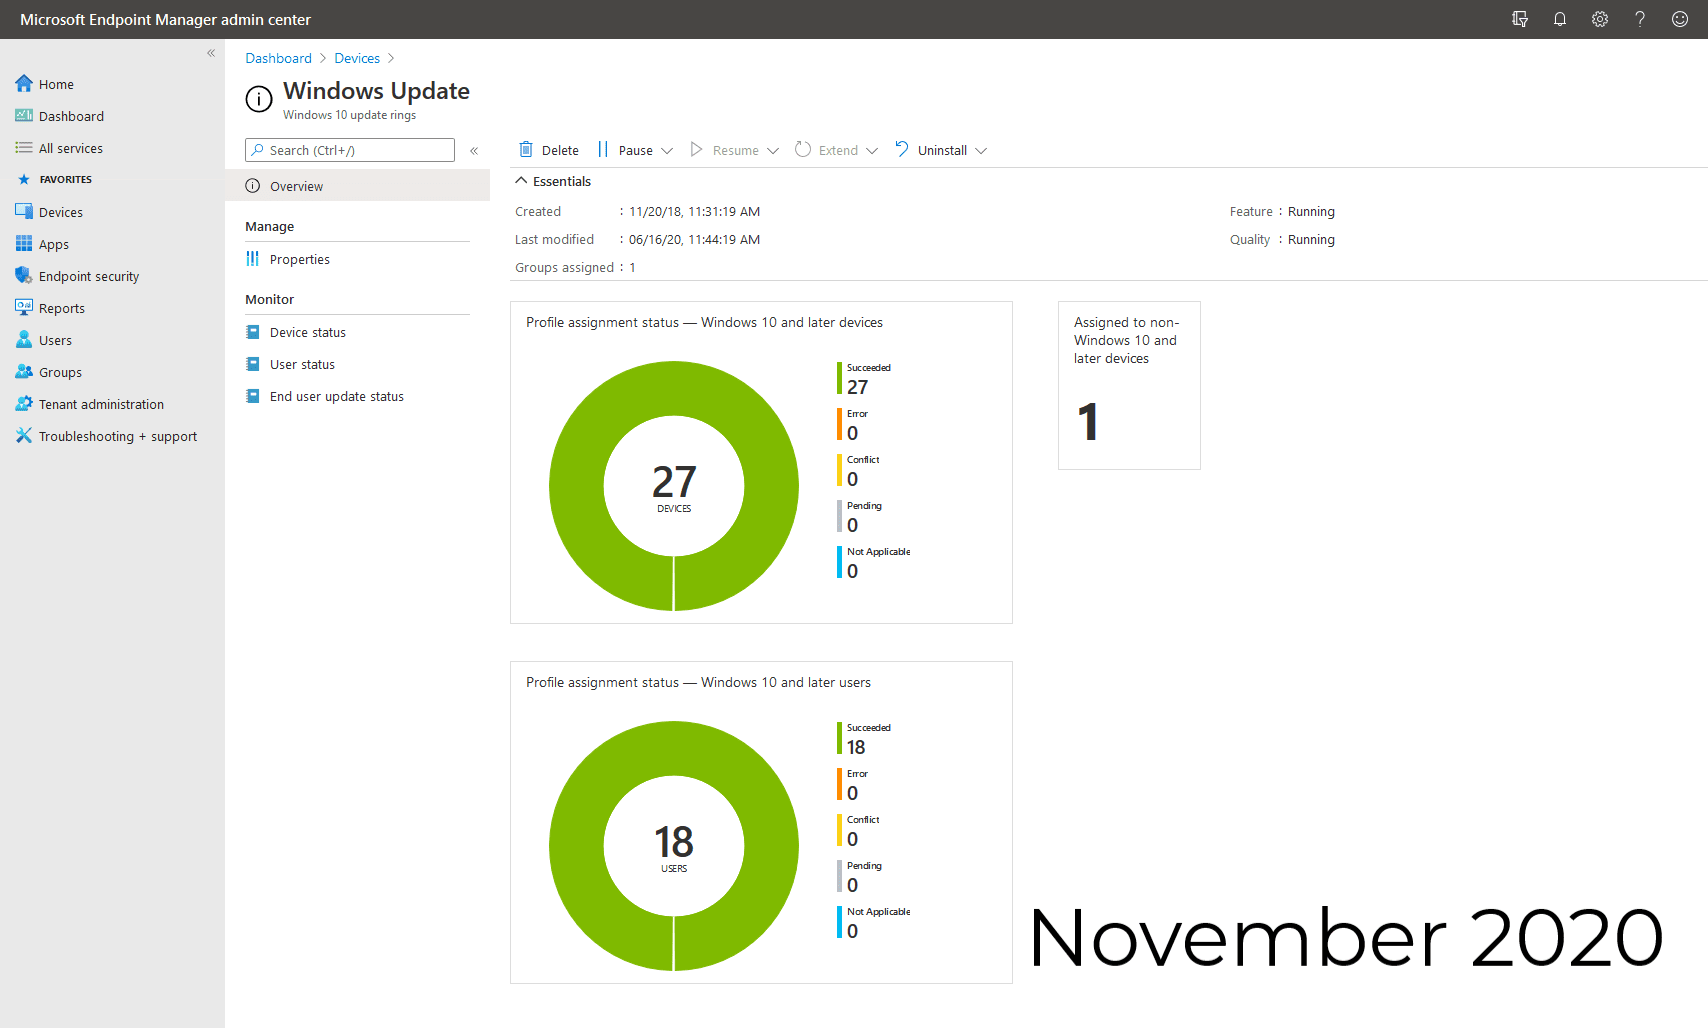 Patch Tuesday November 2020